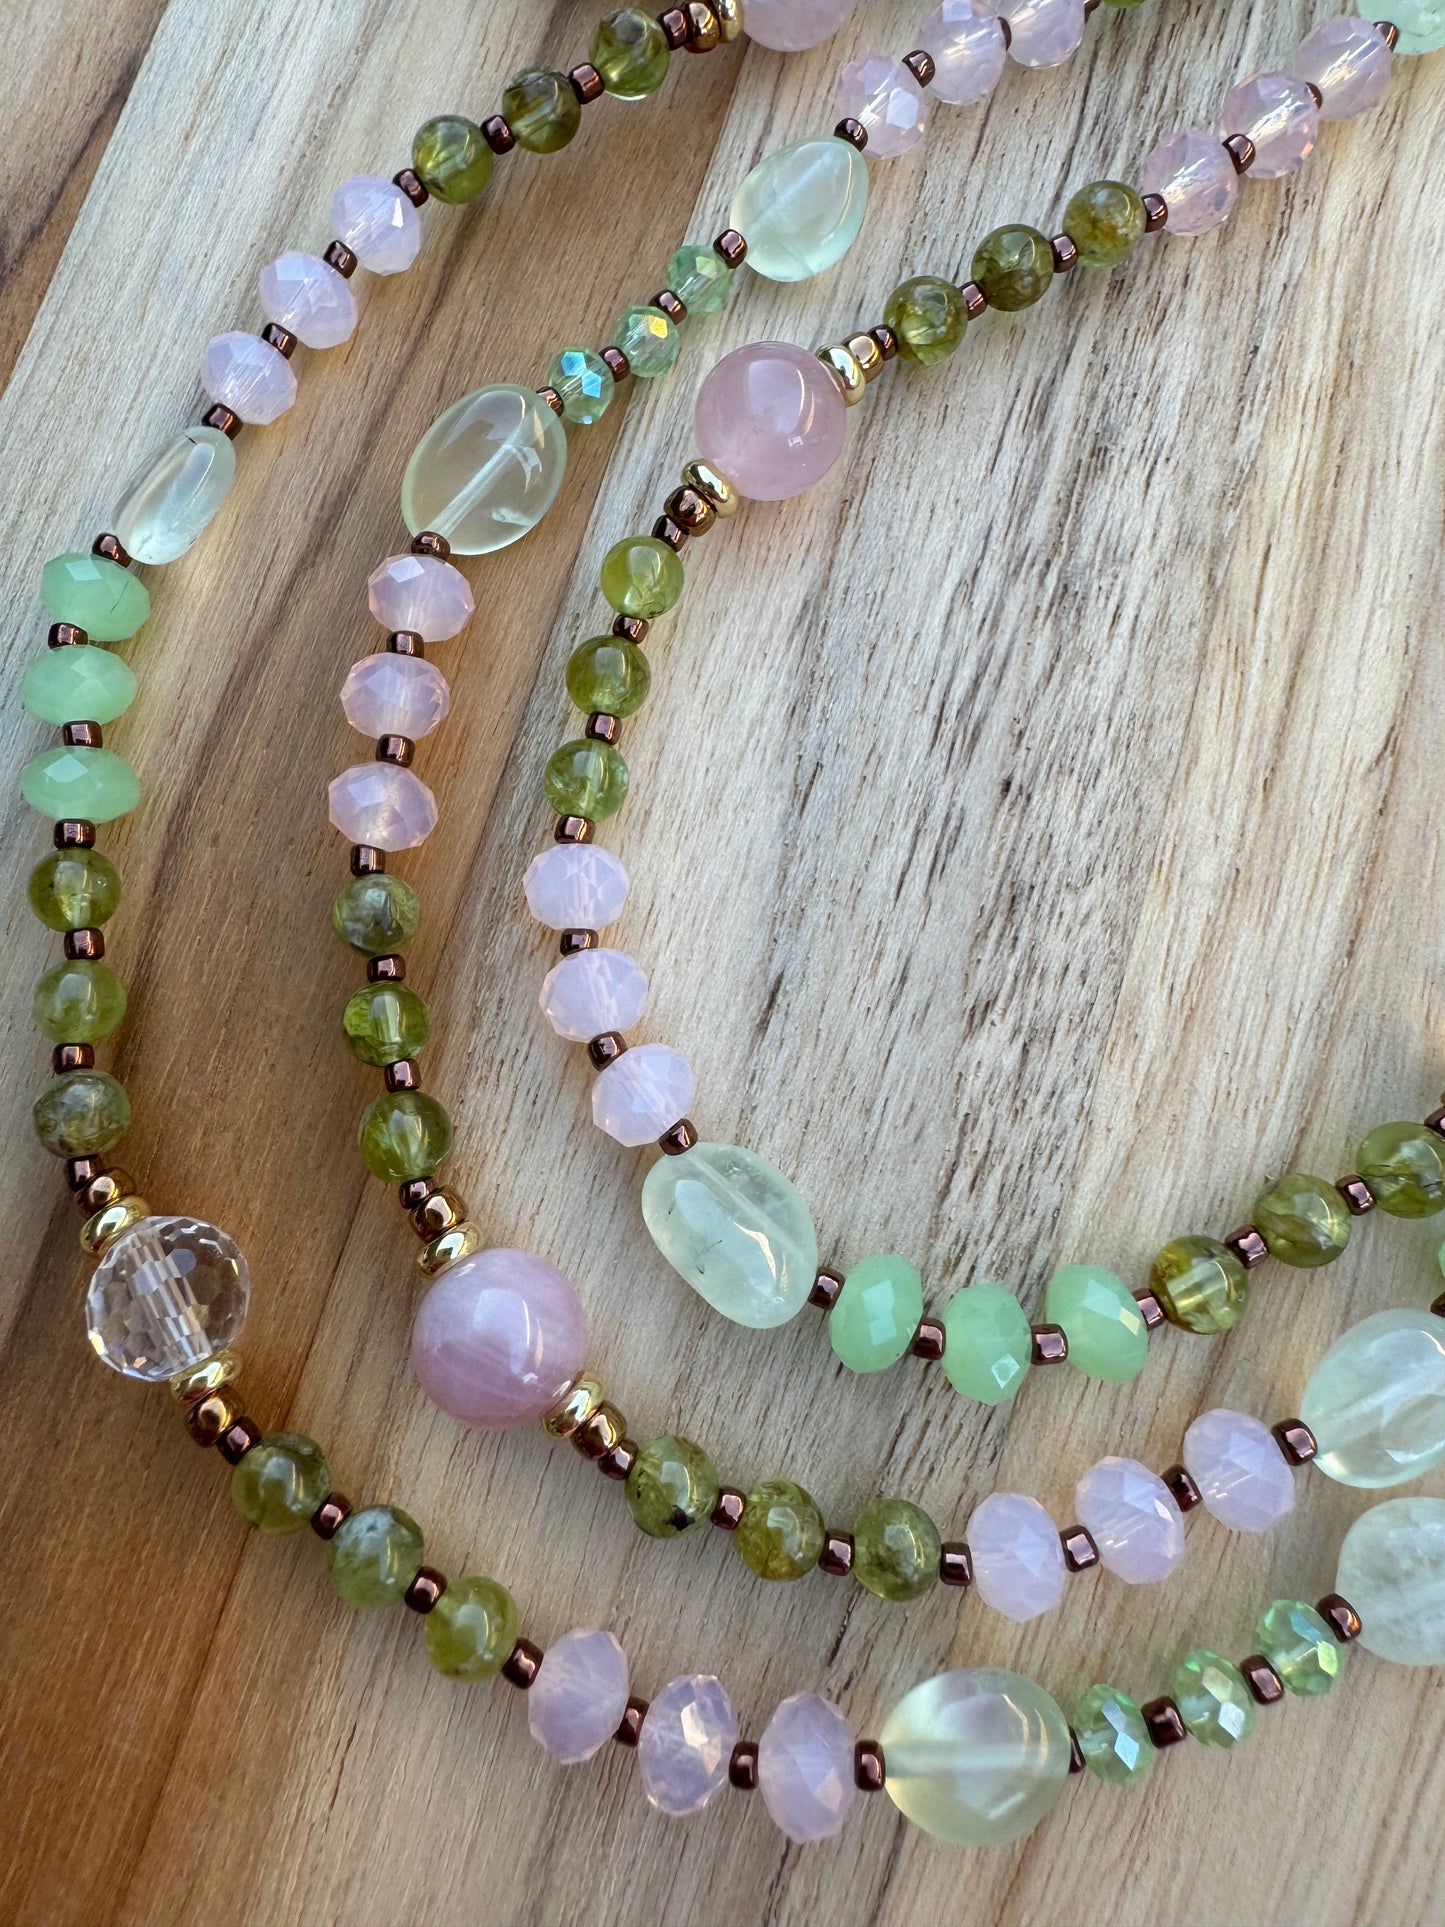 60" Extra Long Wraparound Style Madagascar Rose Quartz and clear Quartz Beaded Necklace with Peridot prehnite and Crystal Beads - My Urban Gems